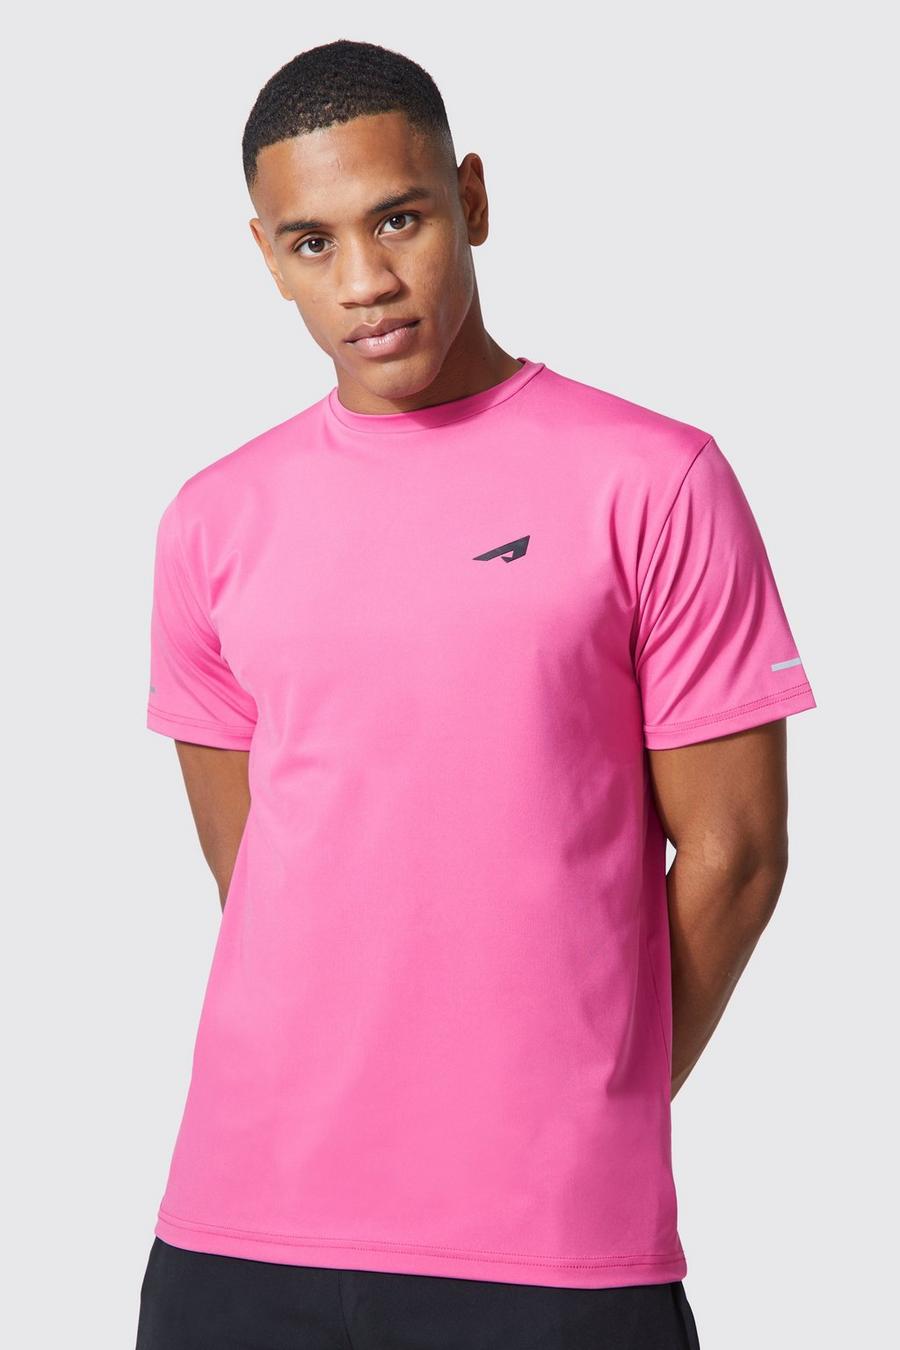 T-shirt Active con logo per alta performance, Bright pink image number 1